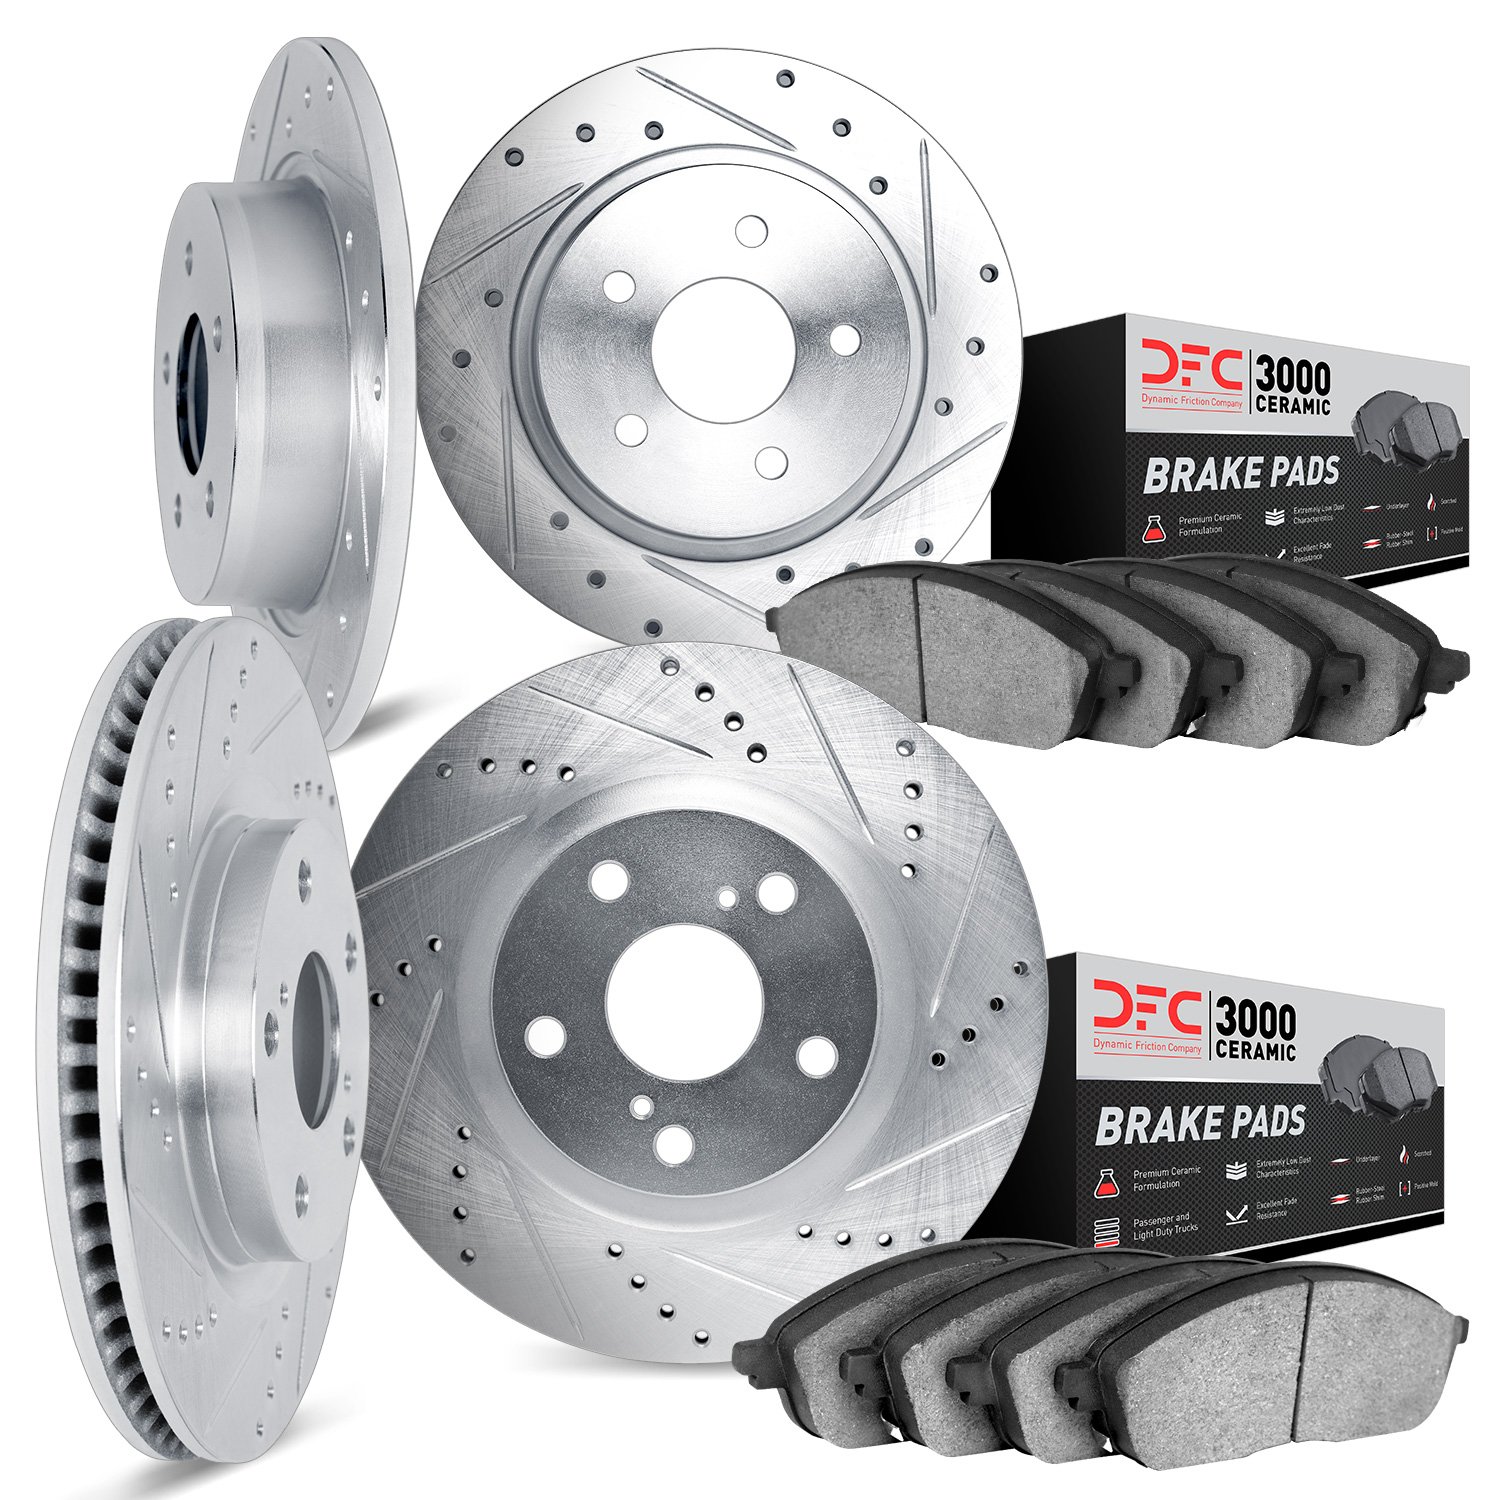 7304-54051 Drilled/Slotted Brake Rotor with 3000-Series Ceramic Brake Pads Kit [Silver], 2003-2005 Ford/Lincoln/Mercury/Mazda, P